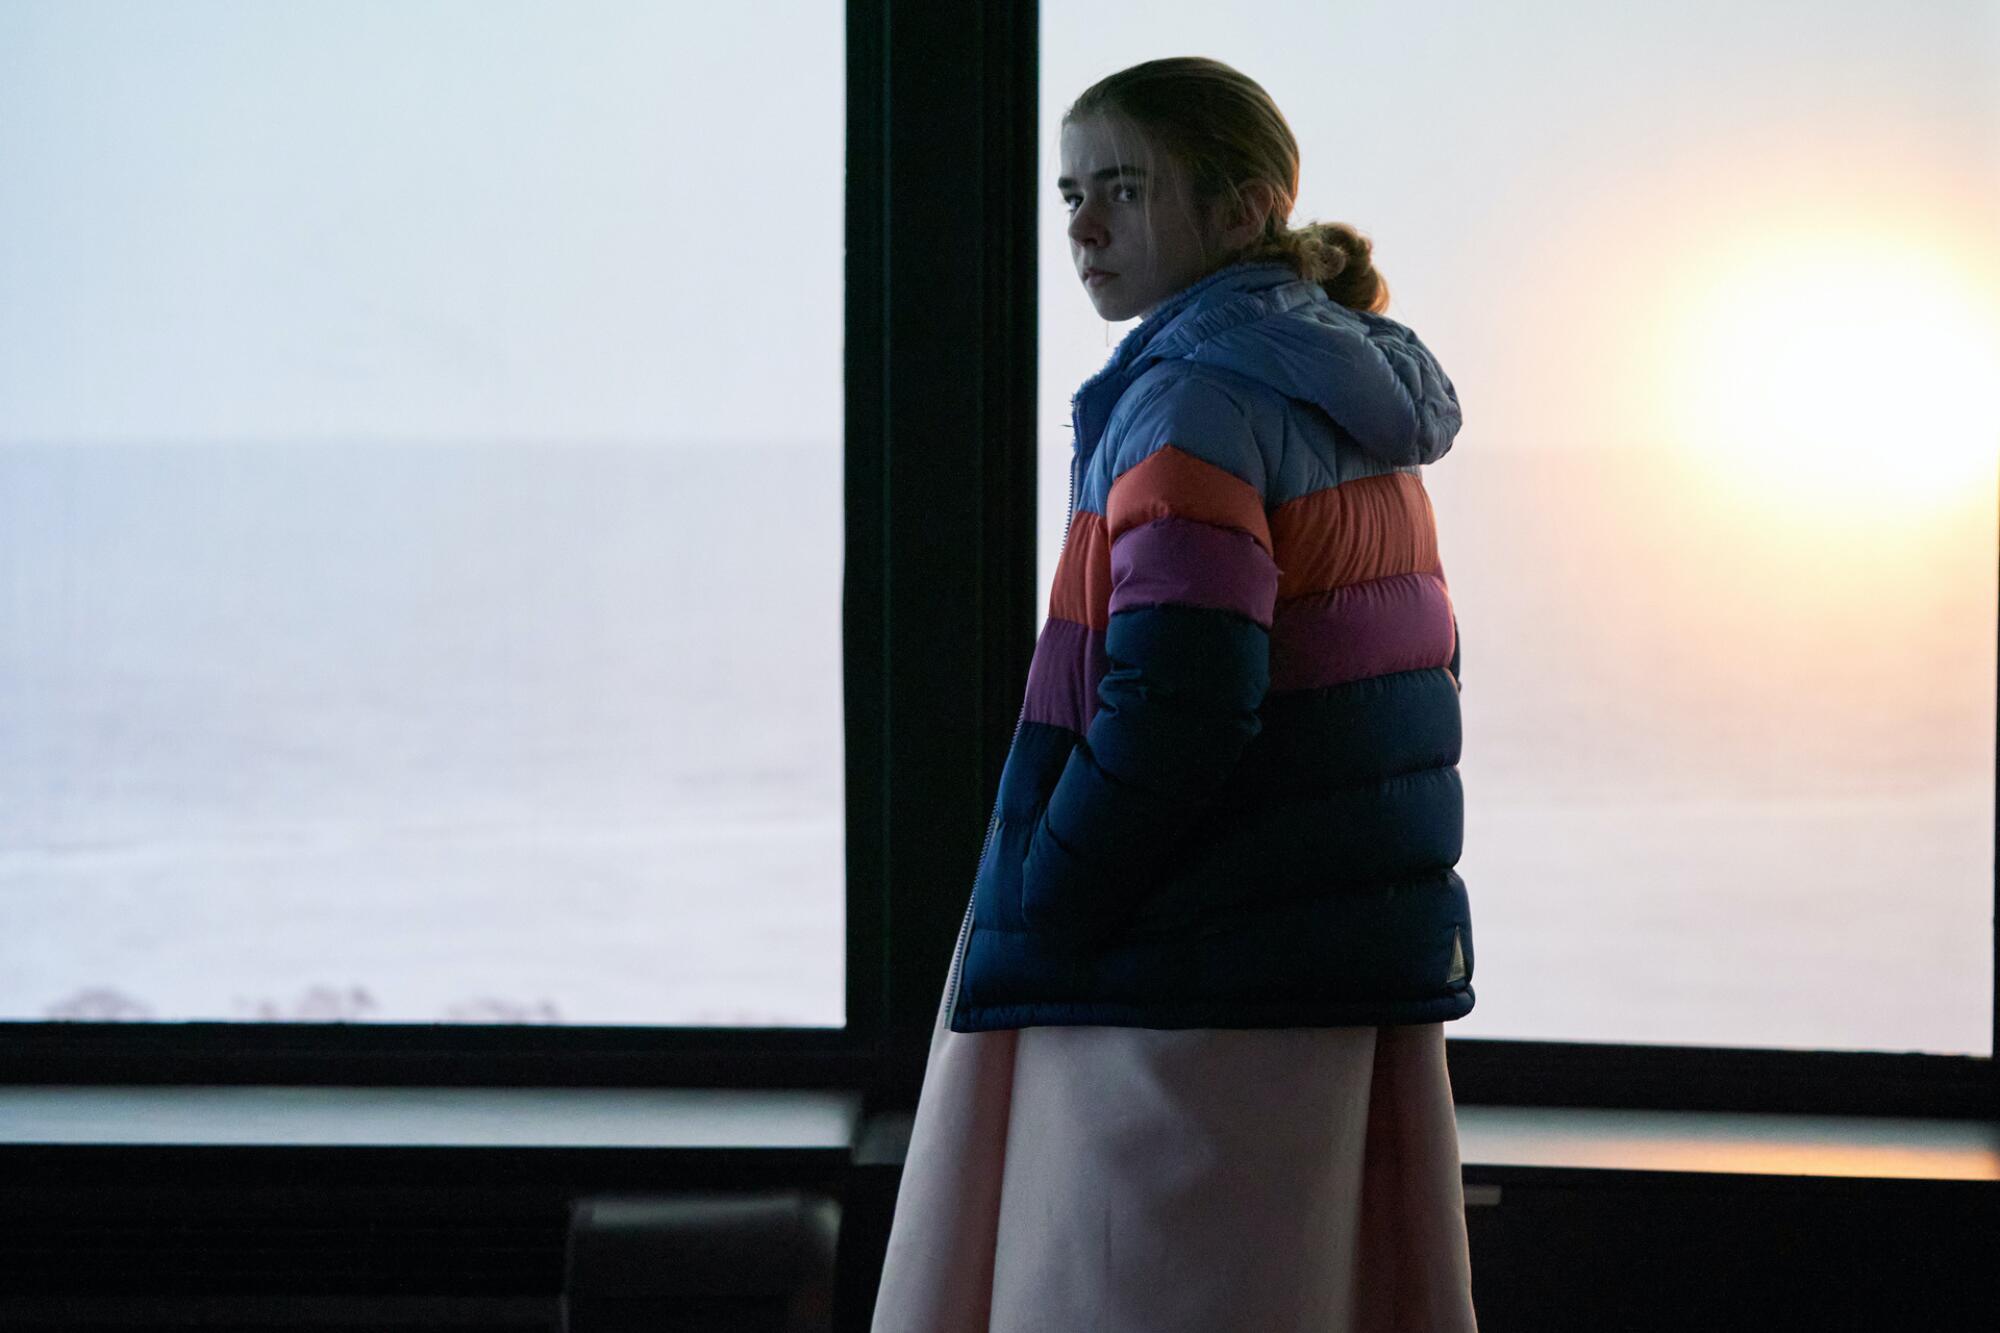 A pre-teen girl wears a coat indoors standing in front of a window in a scene from "Station Eleven."